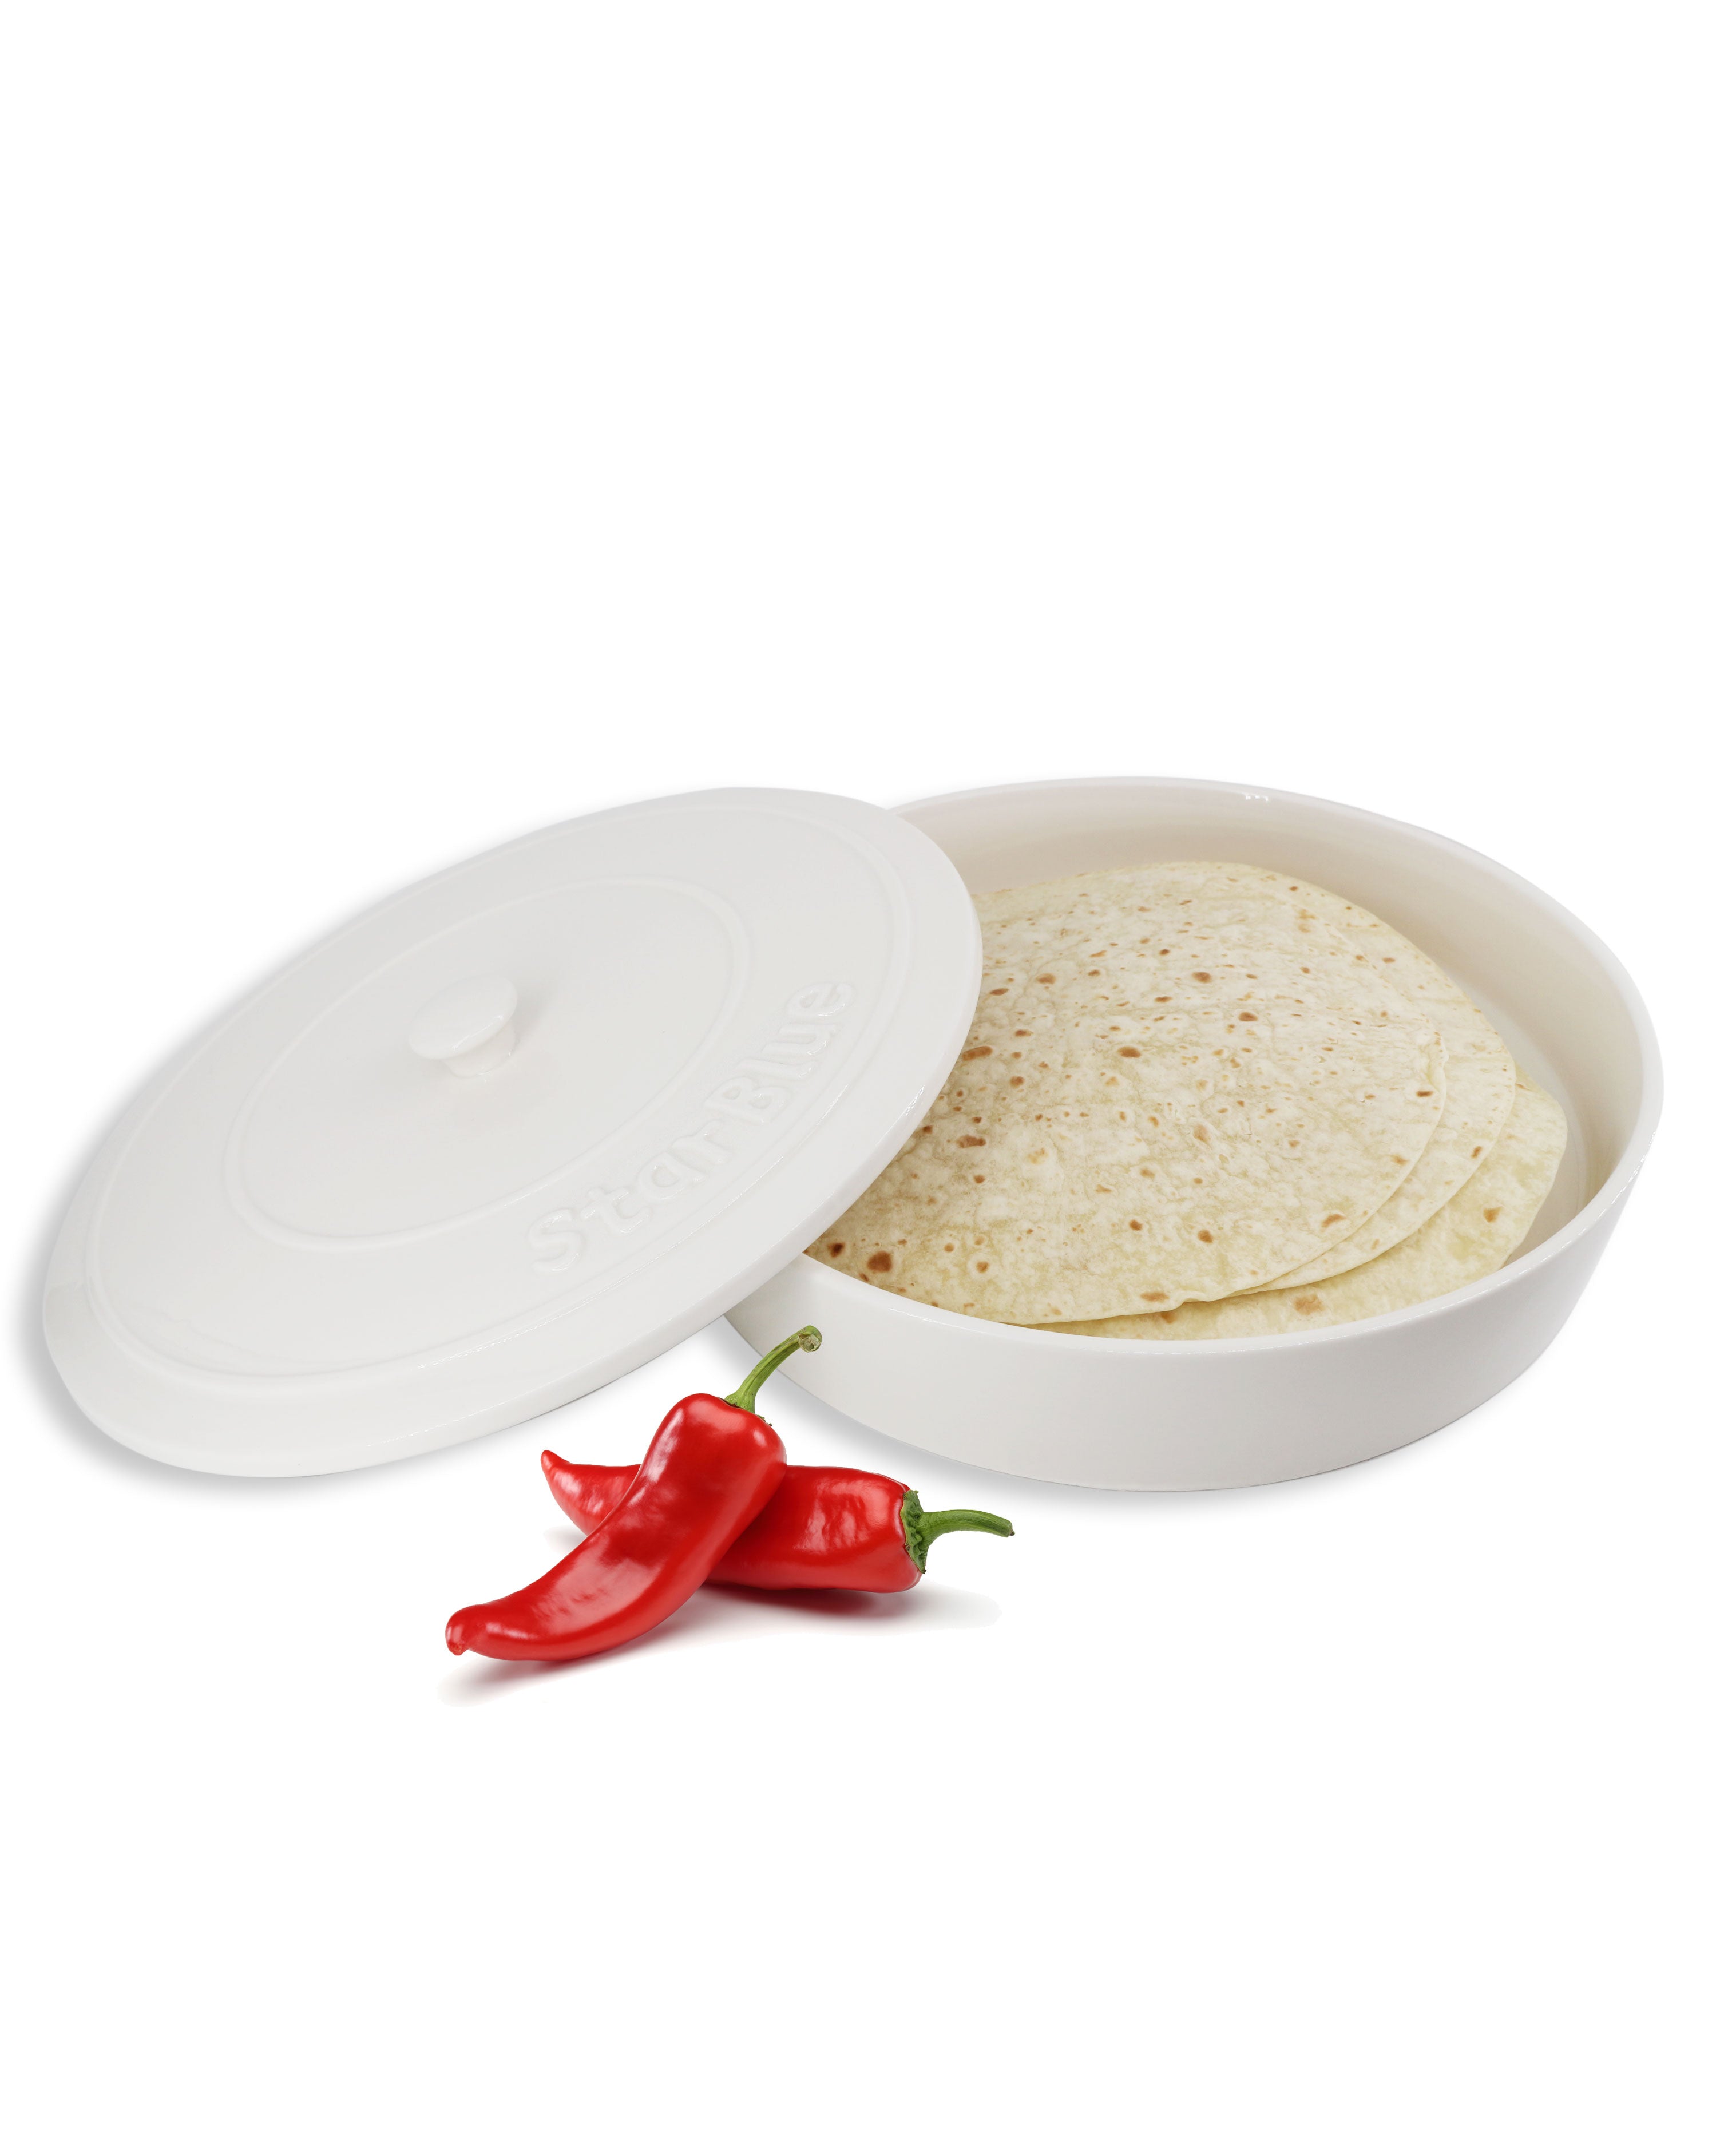 10 Inches Ceramic Tortilla Warmer by StarBlue with Free Recipes eBook